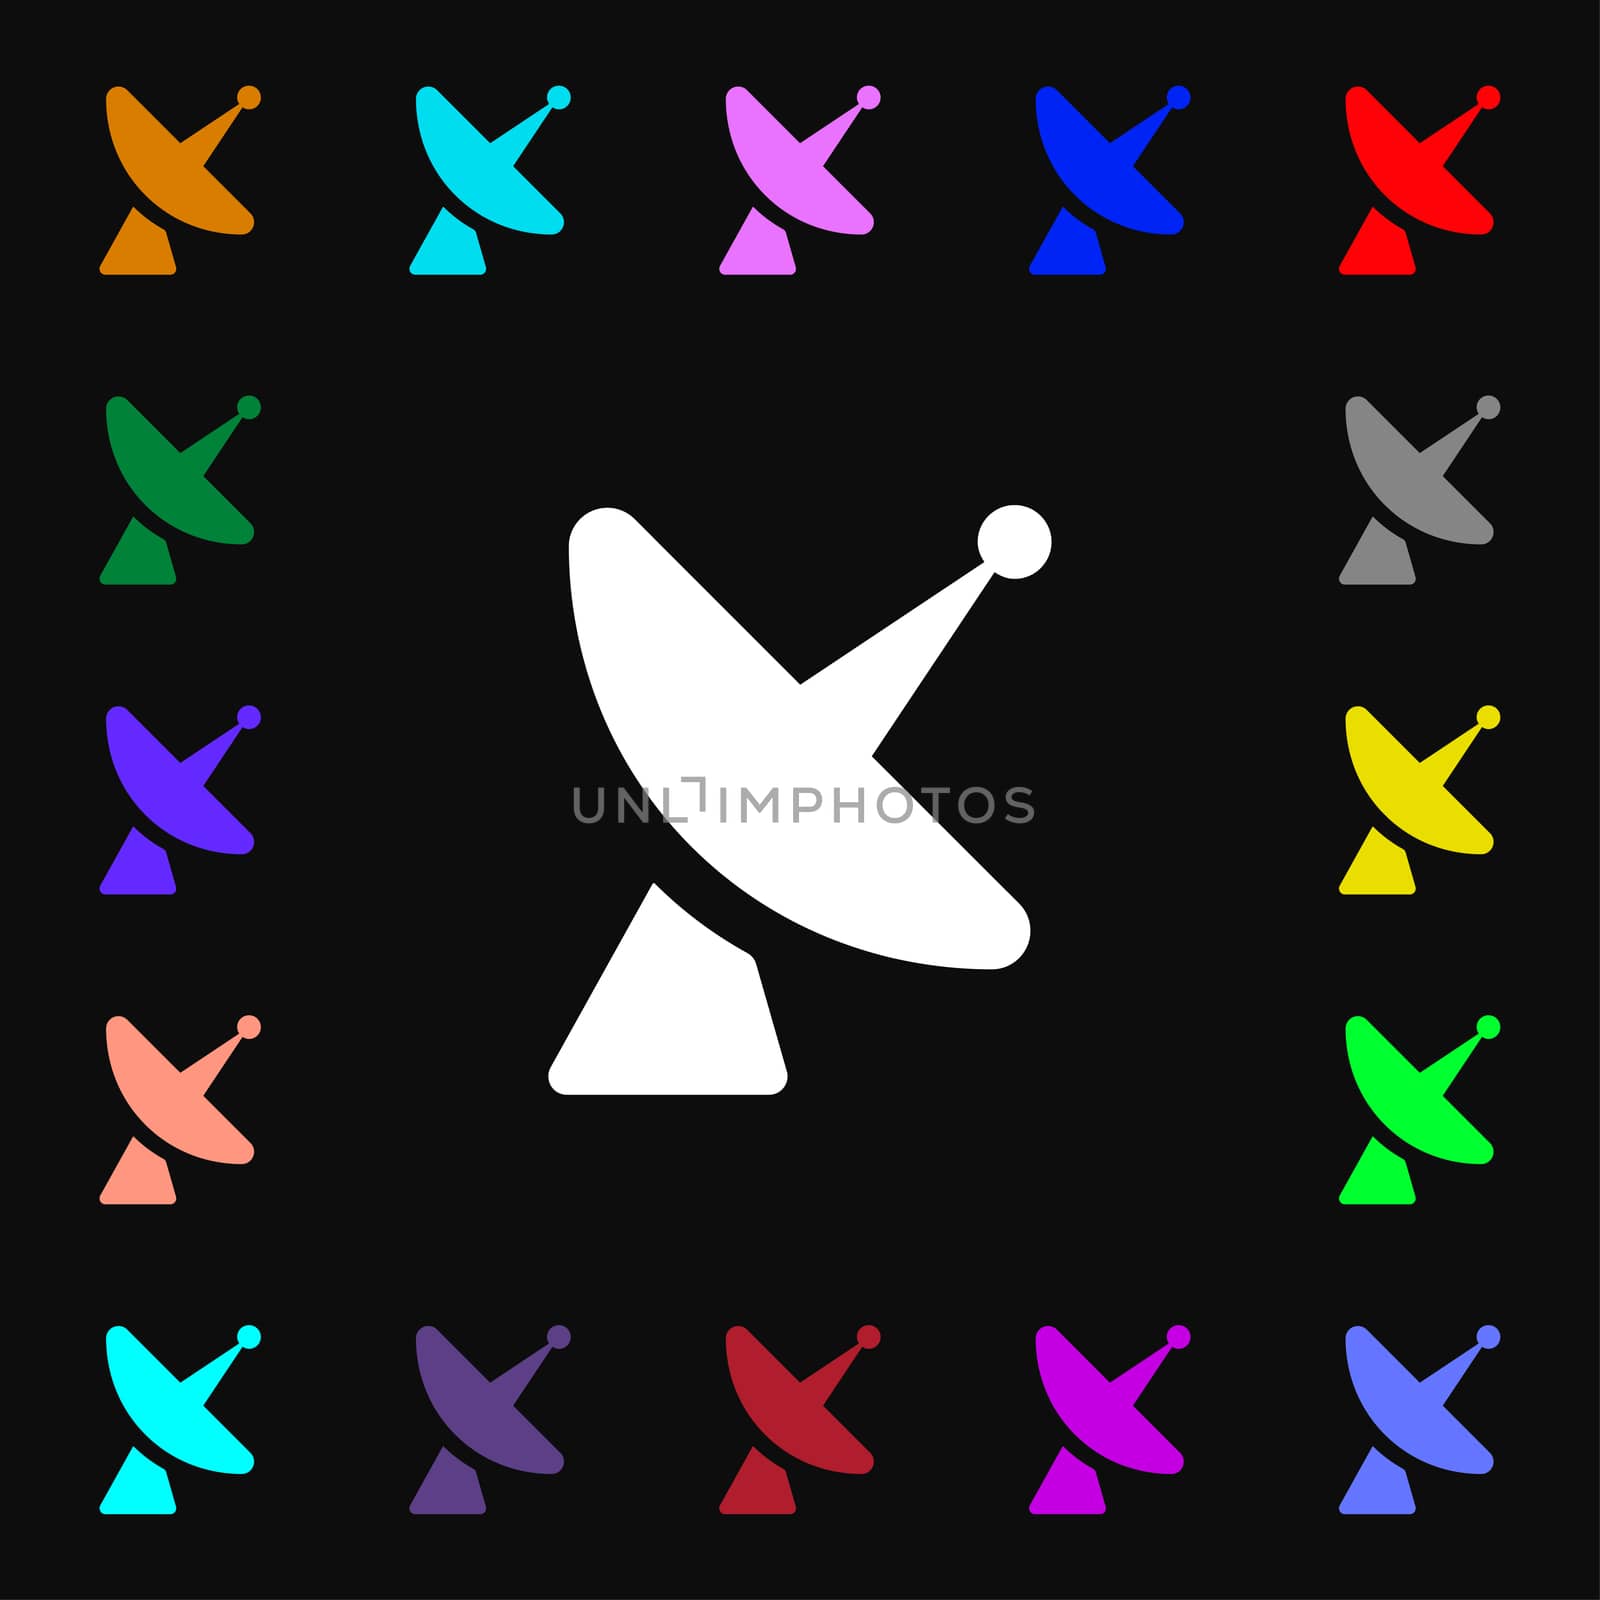 Satellite dish icon sign. Lots of colorful symbols for your design. illustration